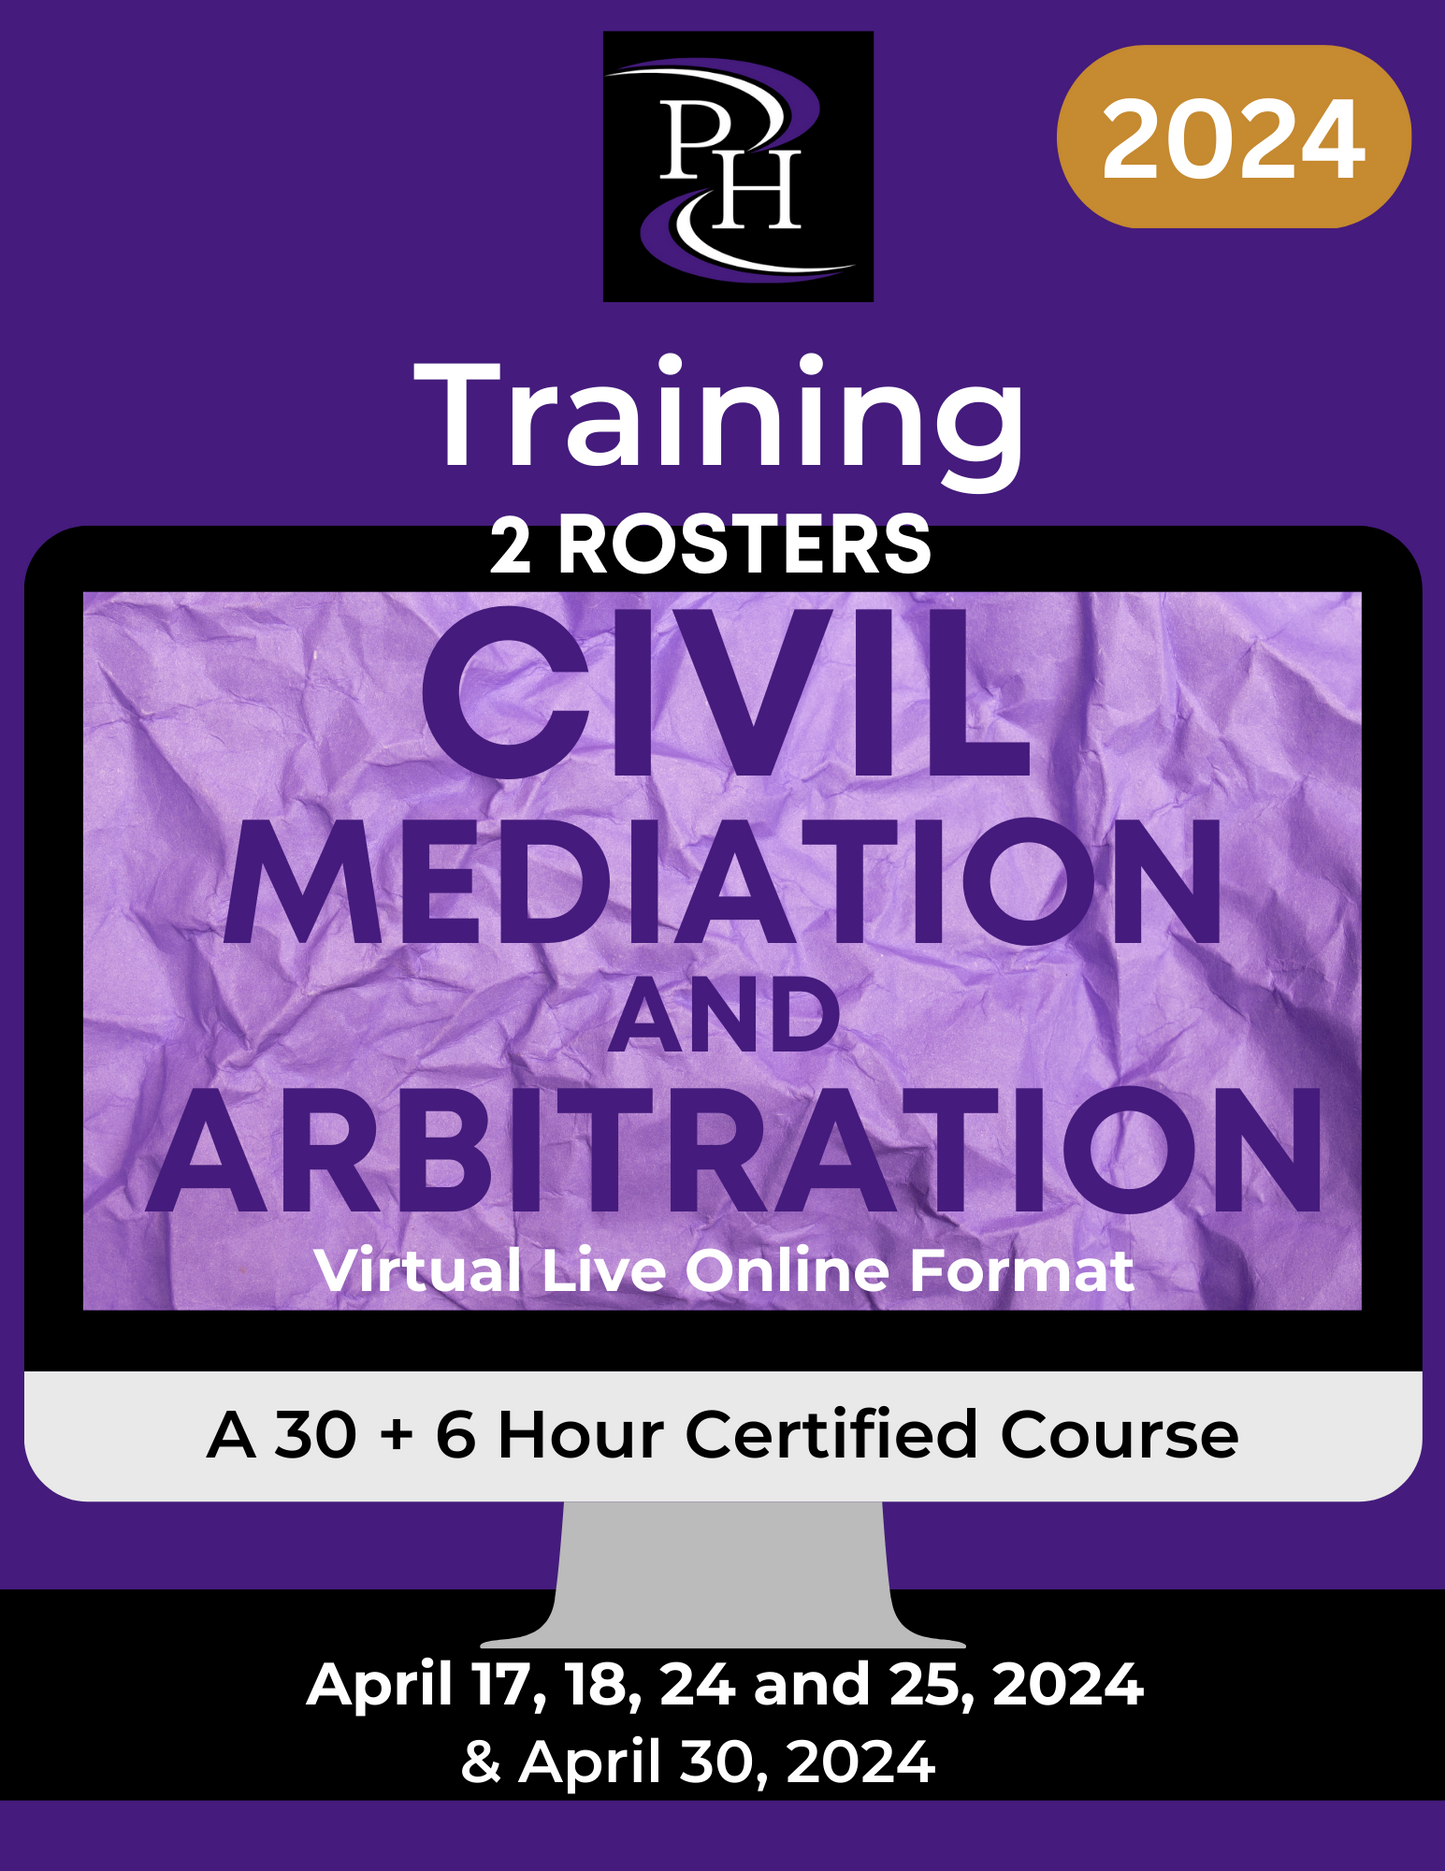 Civil Mediation and Arbitration - Certified Skills Training (TWO ROSTERS)(April 2024)